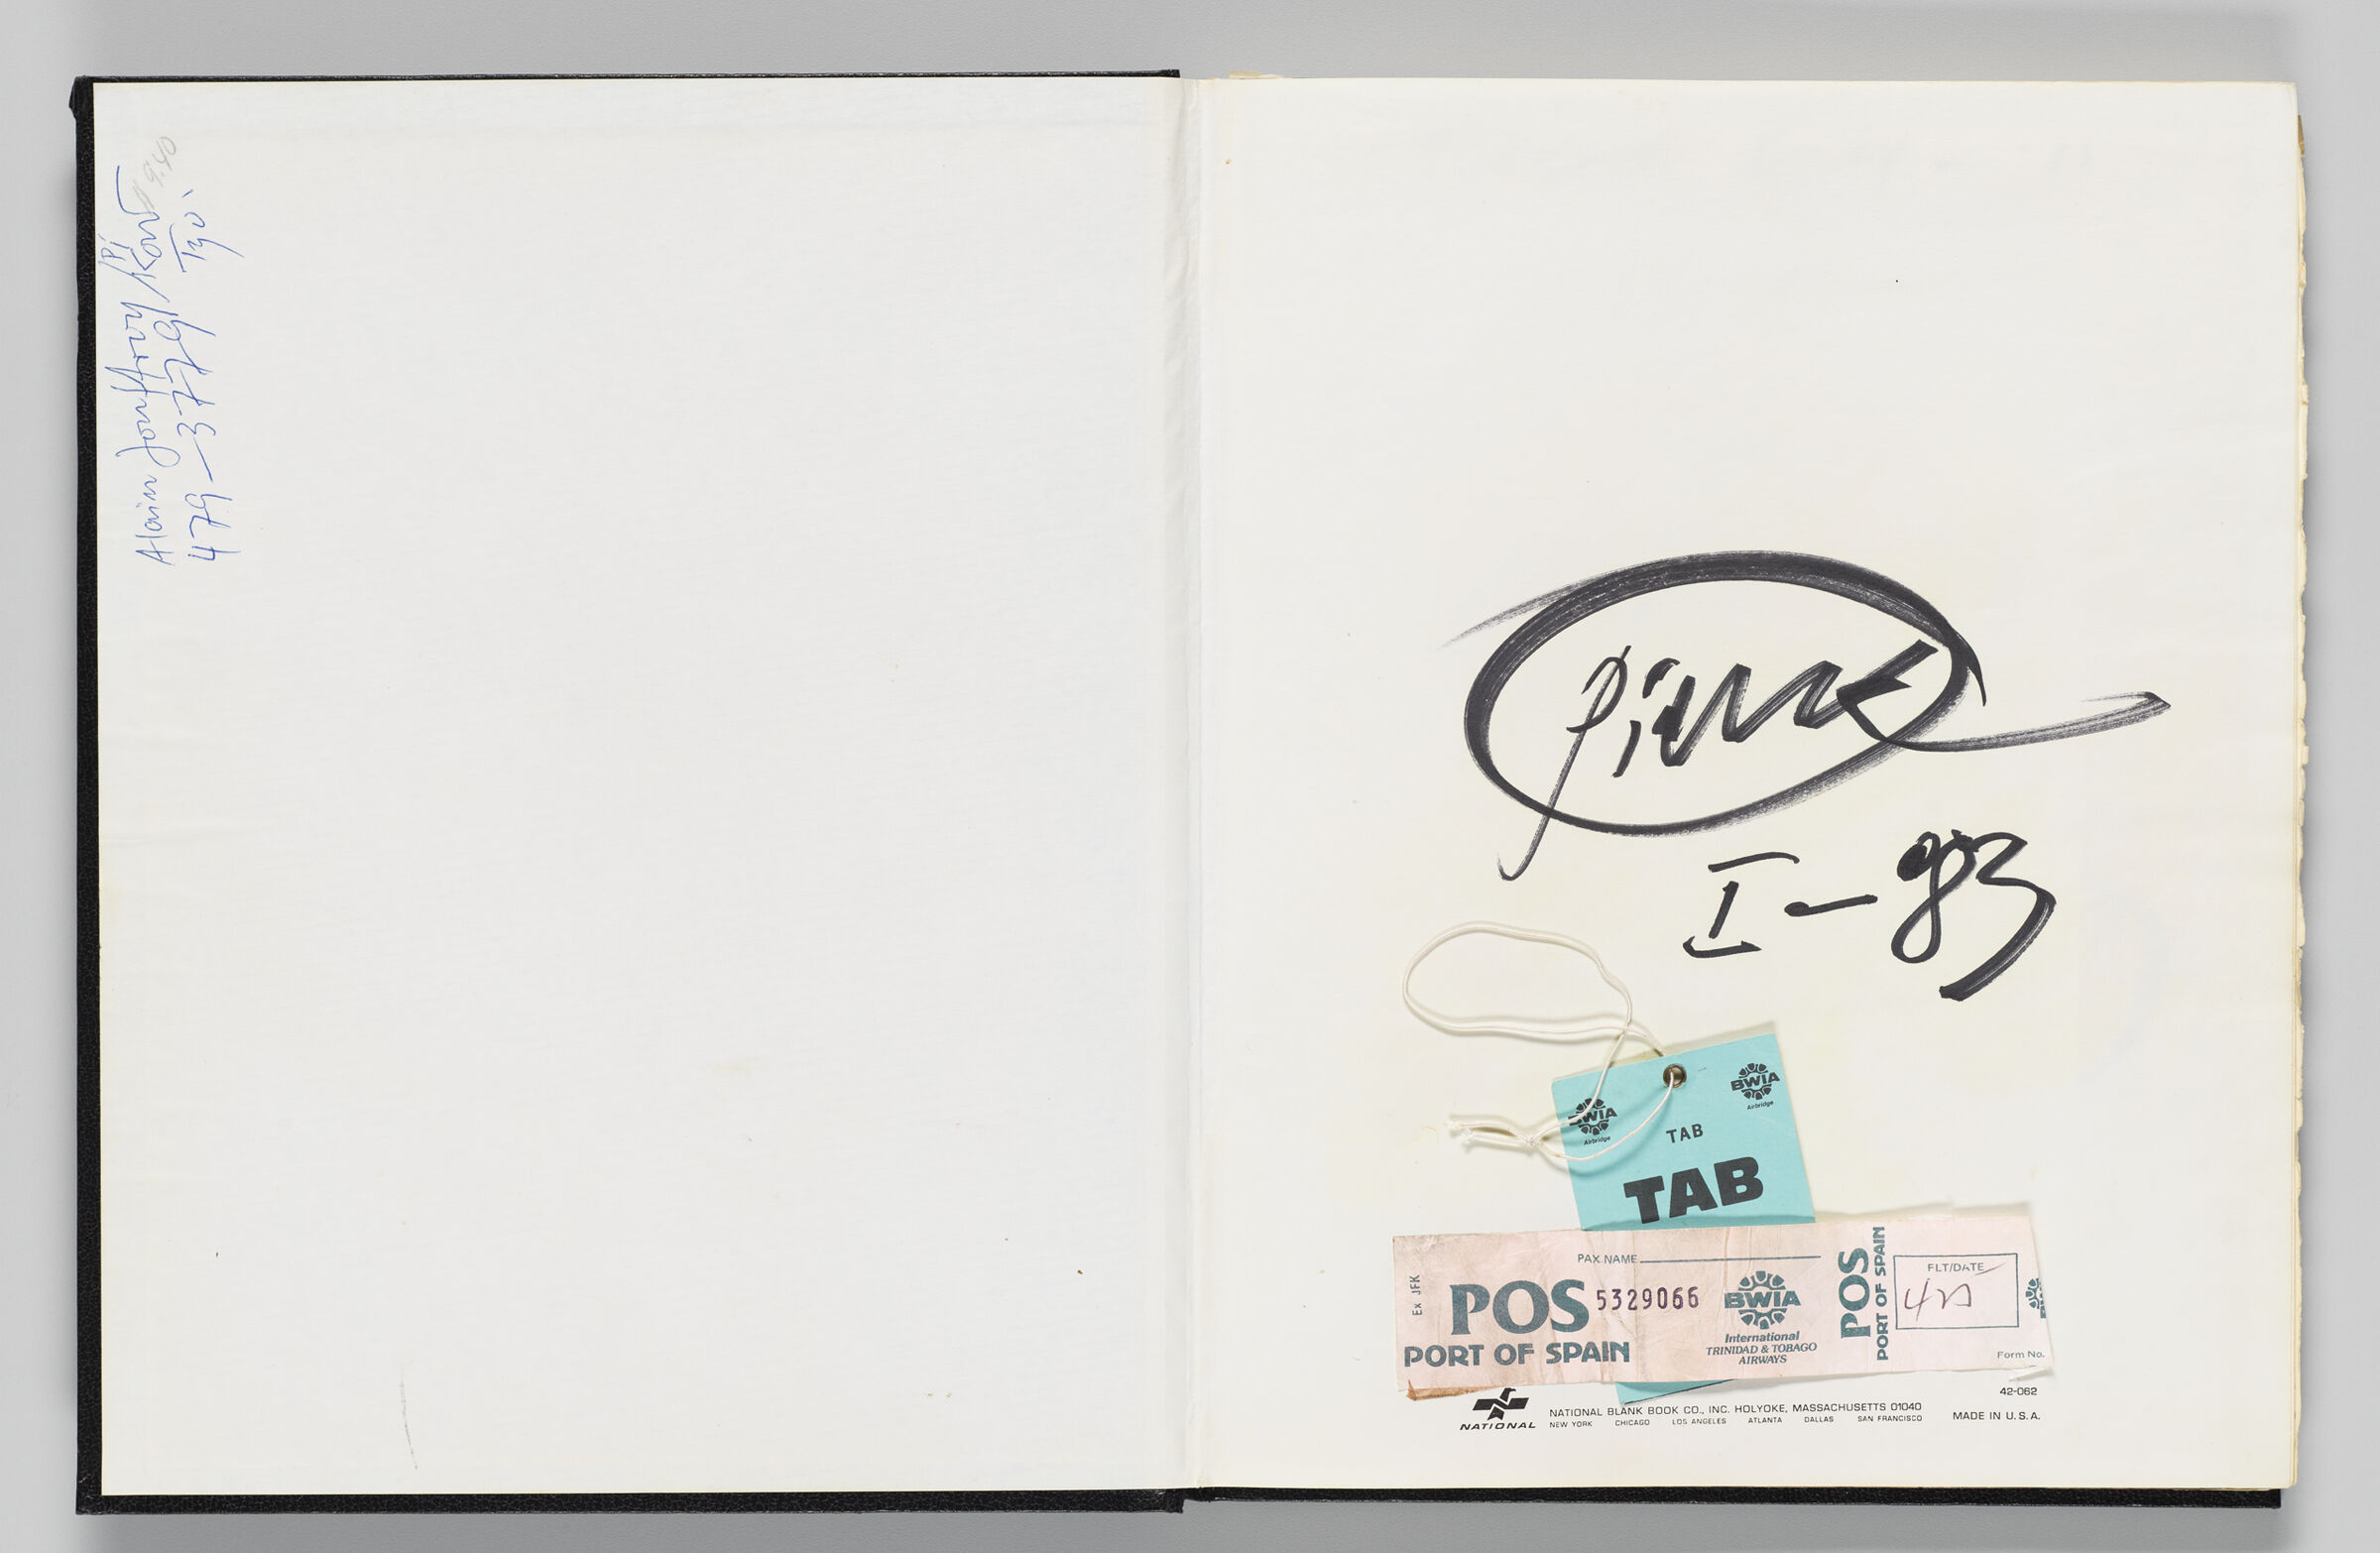 Untitled (Front Endpaper With Note, Left Page); Untitled (Signature With Travel Documents, Right Page)